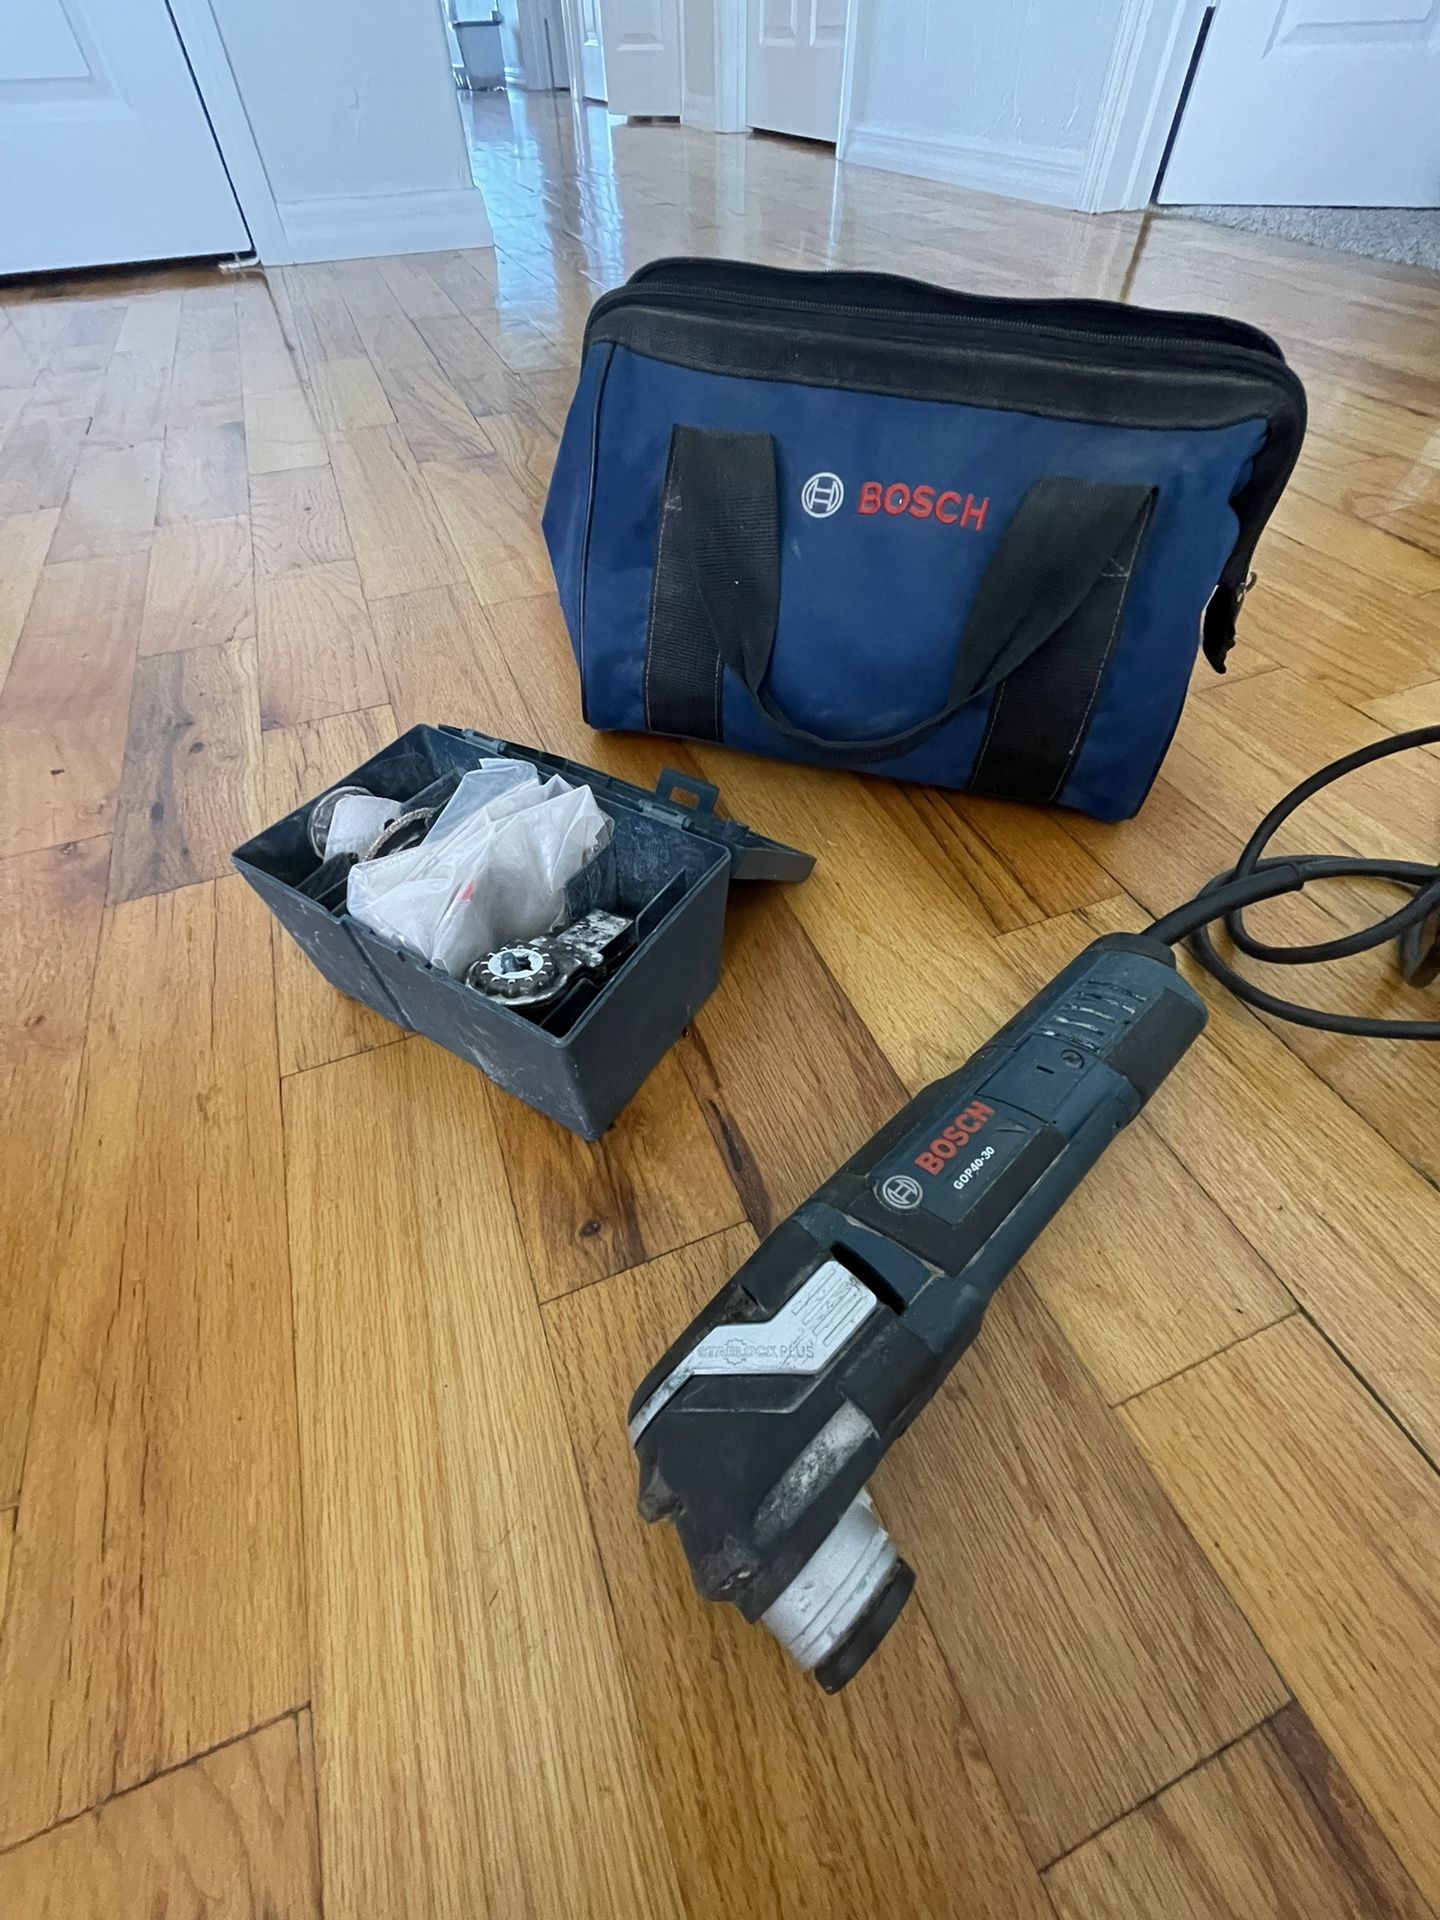 Bosch Corded Oscillating Tool with attachments